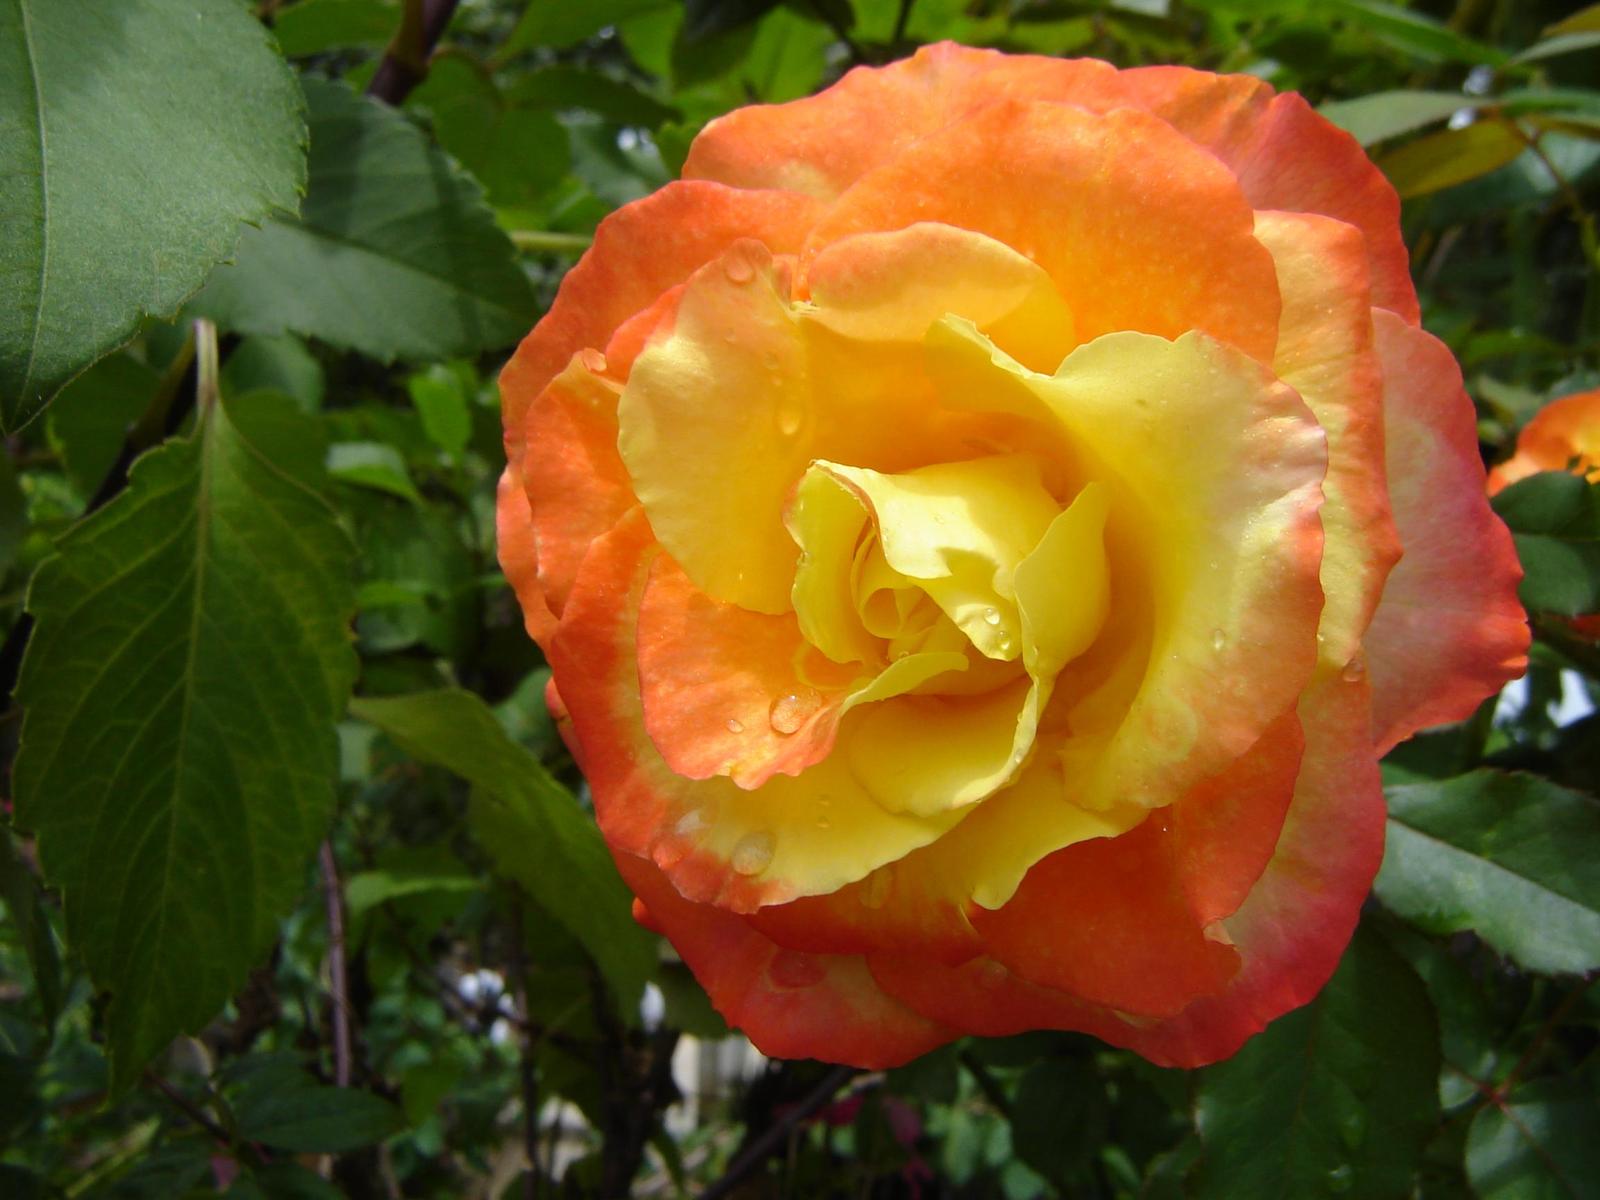 the yellow and orange rose has drops of water on it